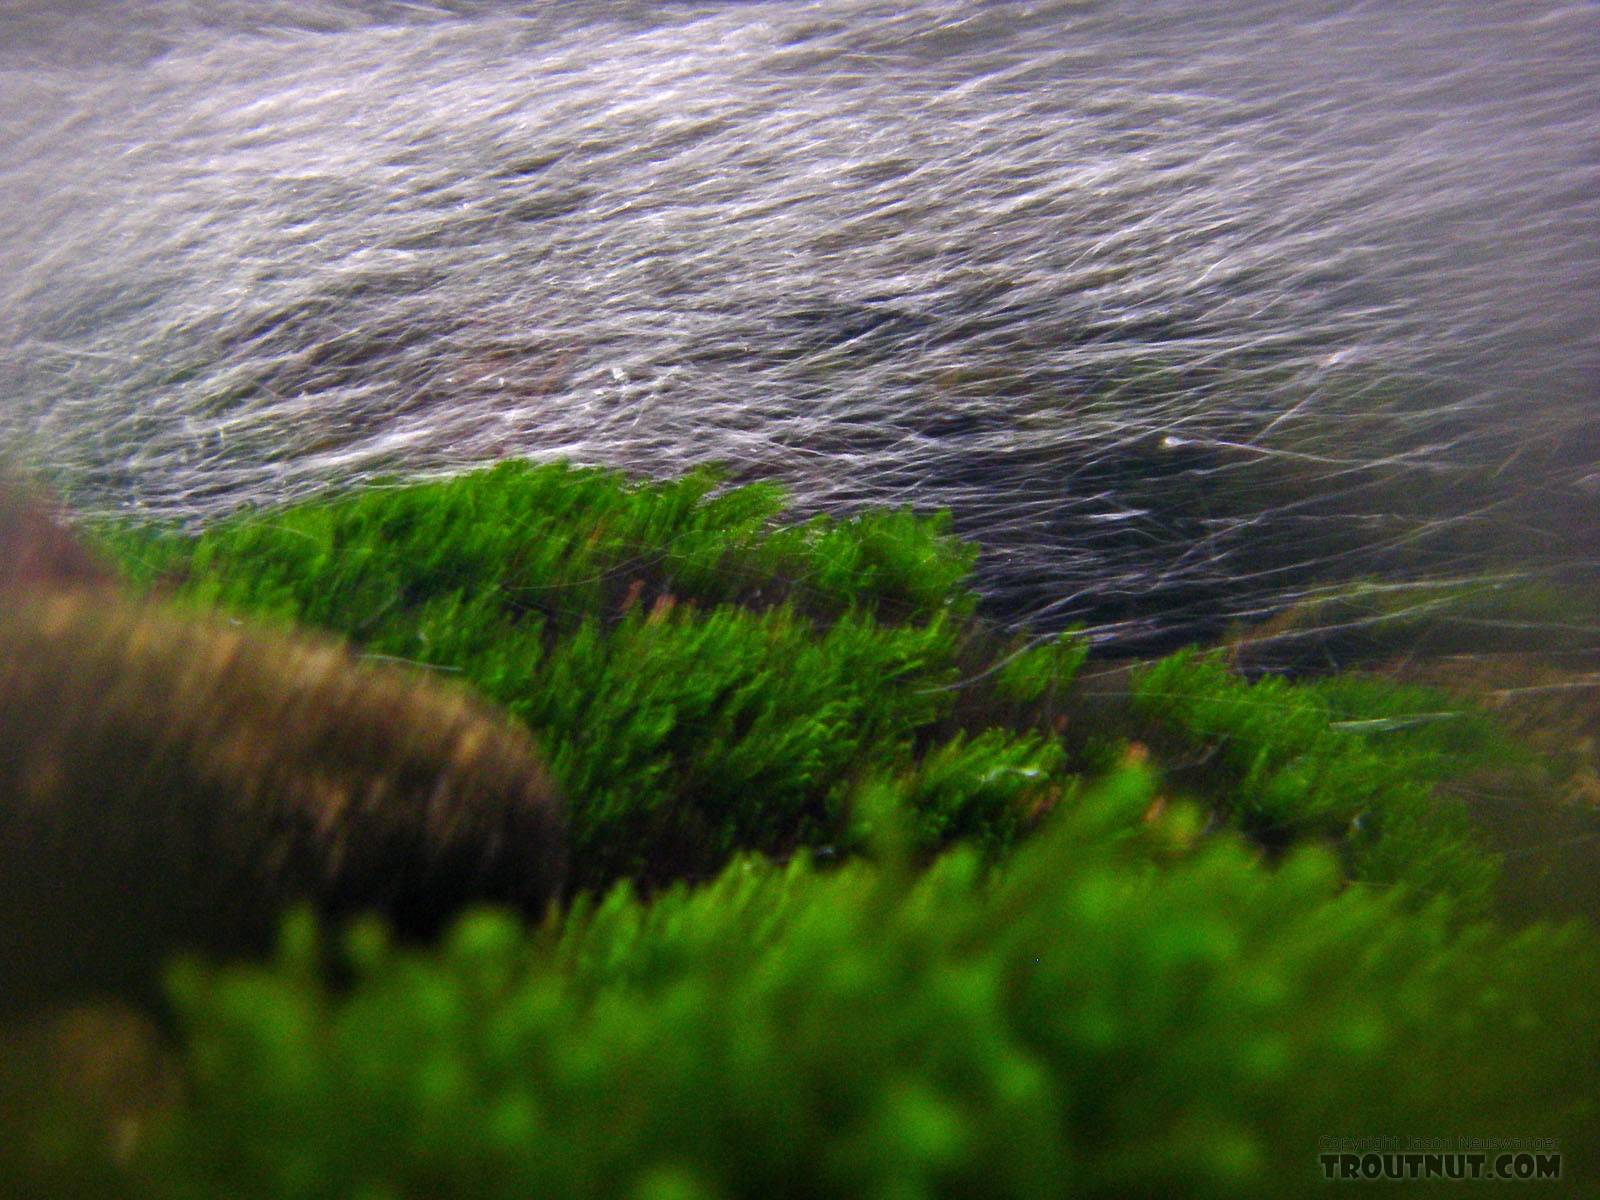 Underwater moss and riffle bubbles. From the Mystery Creek # 23 in New York.